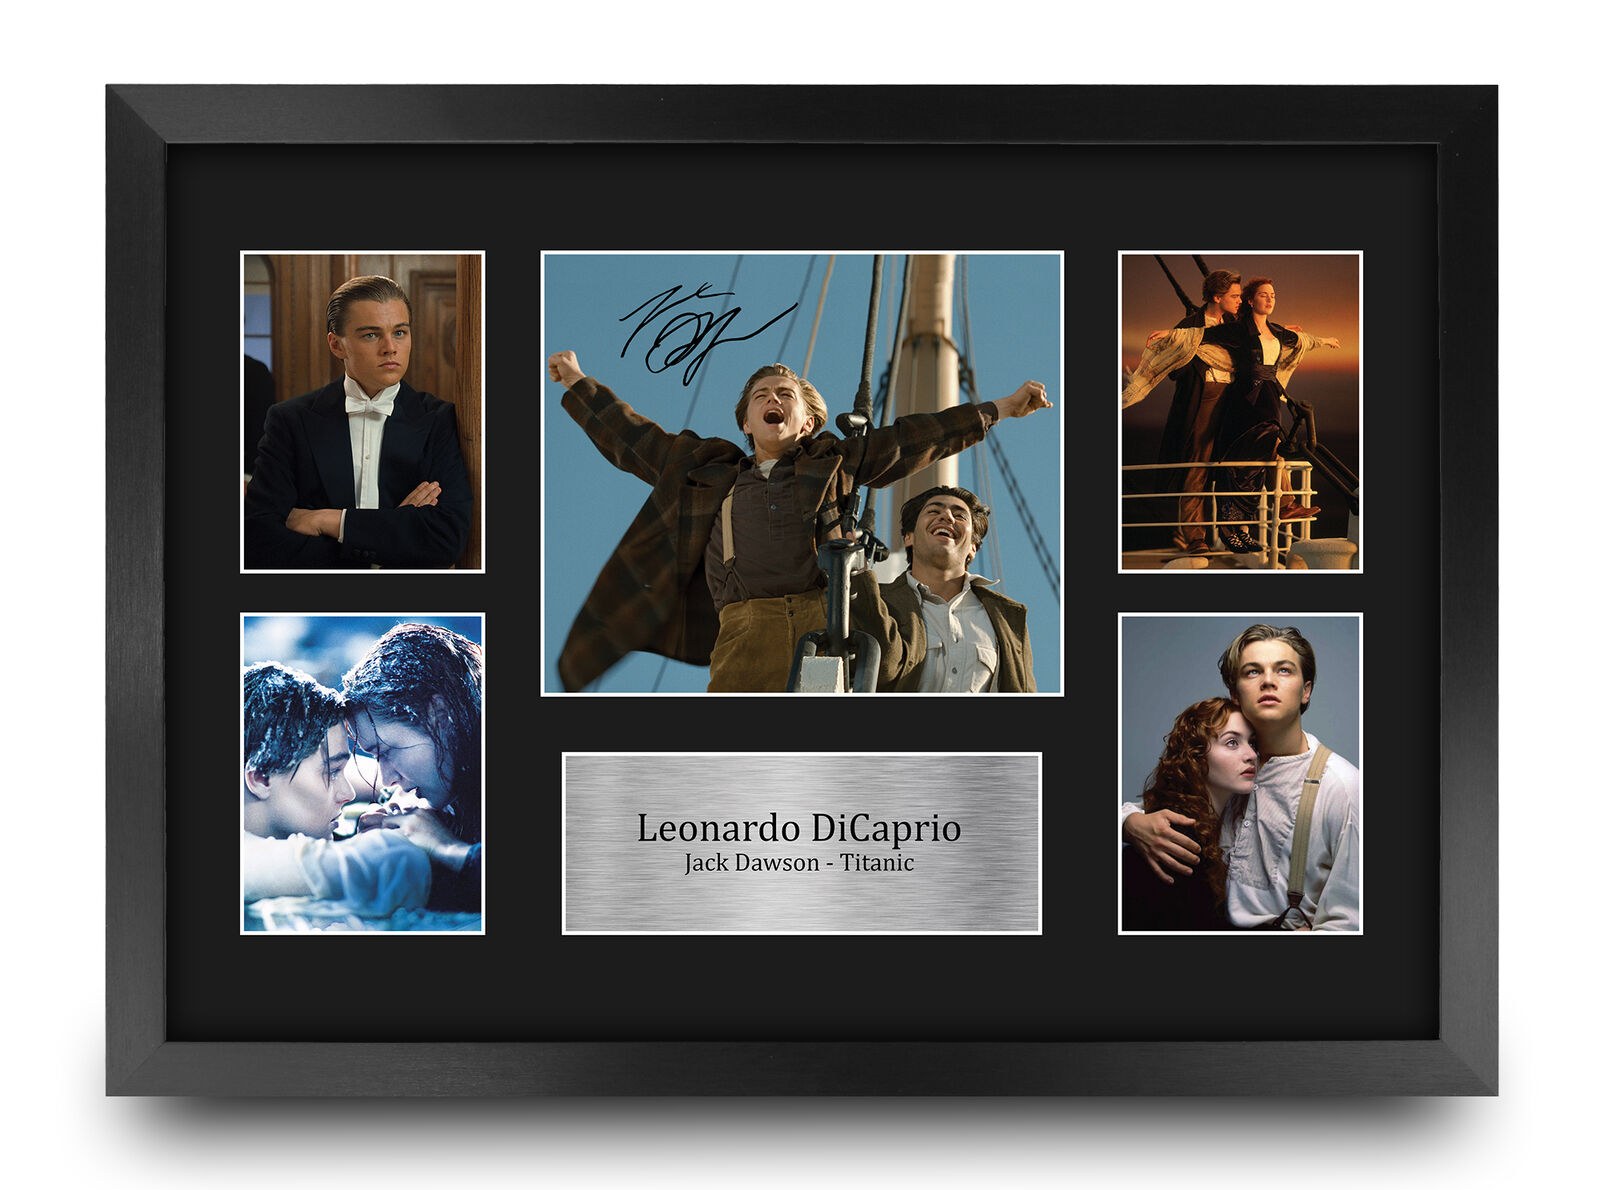 Leonardo DiCaprio Titanic A3 Framed Signed Autograph Picture Gift for Movie Fans